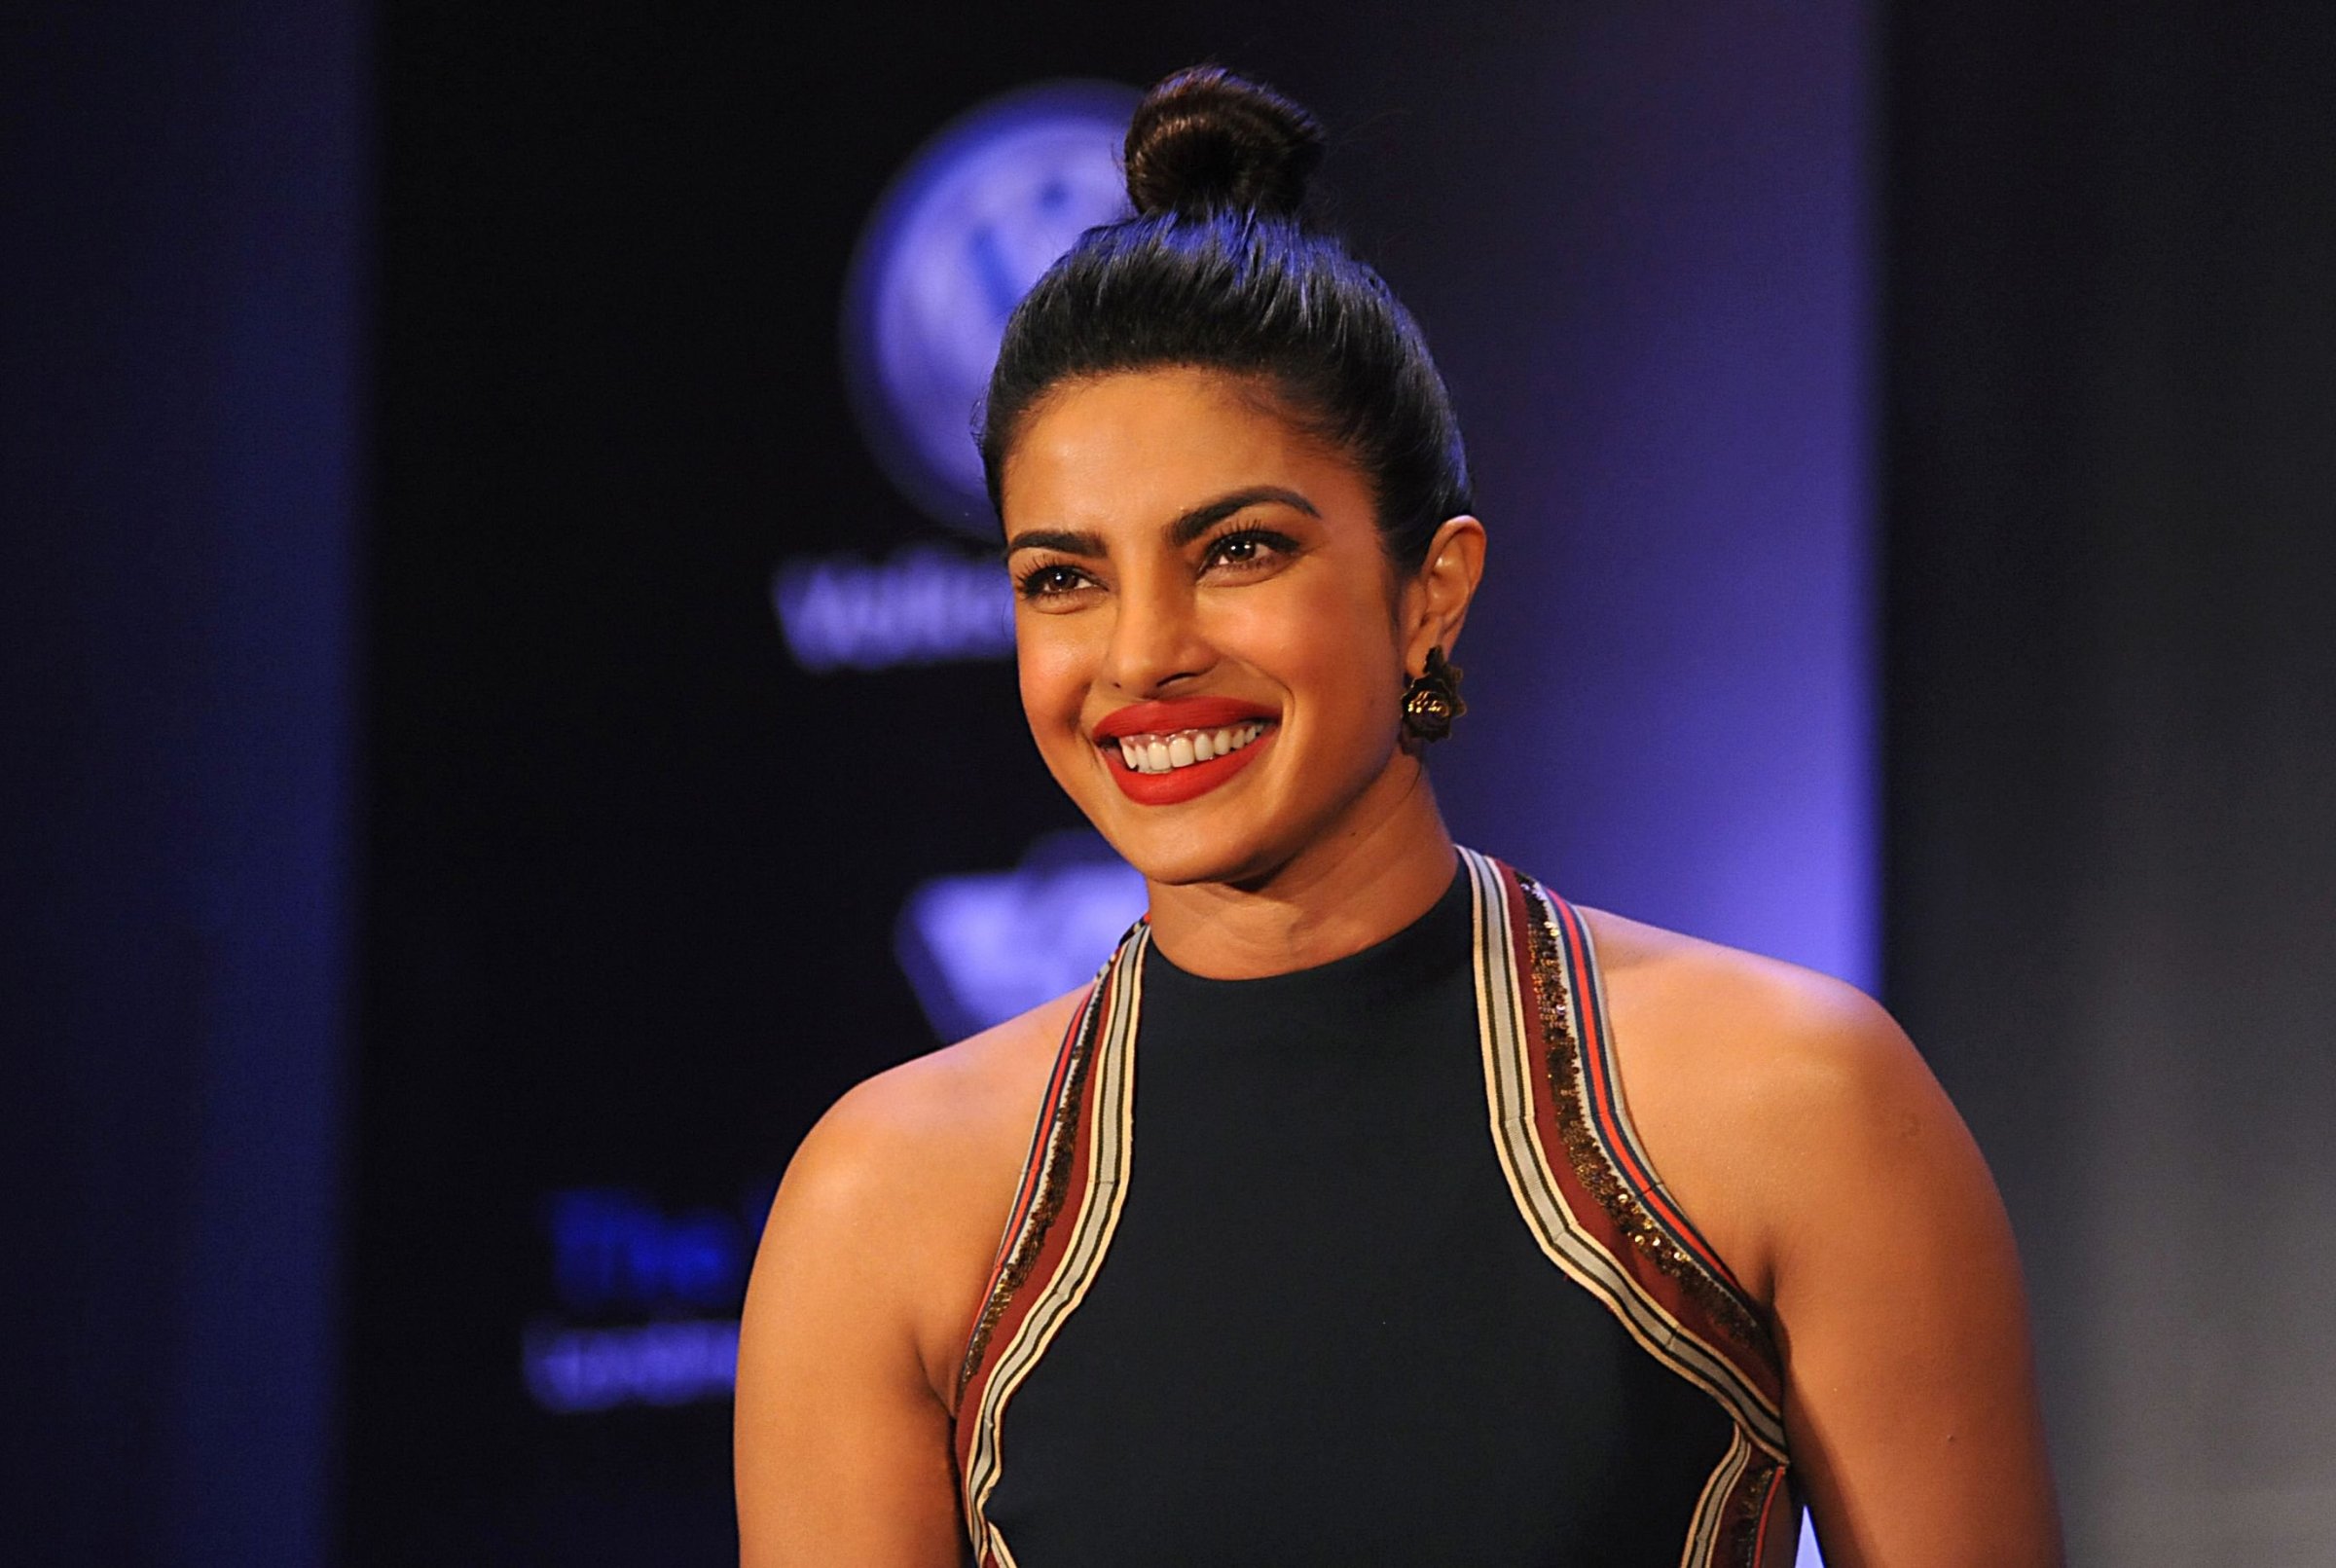 Indian Bollywood actress Priyanka Chopra poses during a promotional event for Maxim India in Mumbai on June 30, 2016.